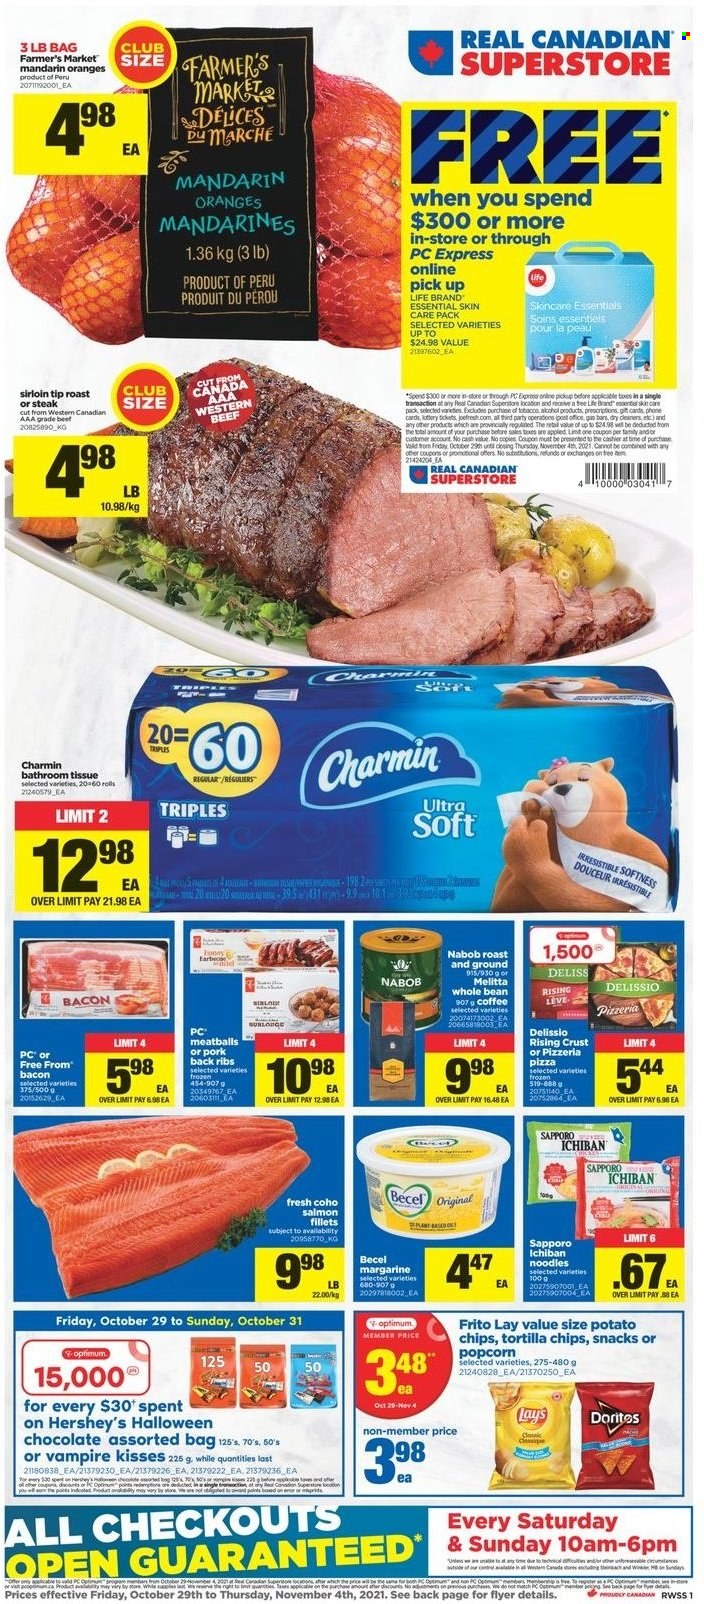 thumbnail - Real Canadian Superstore Flyer - October 29, 2021 - November 04, 2021 - Sales products - mandarines, salmon, salmon fillet, pizza, meatballs, noodles, bacon, margarine, Hershey's, chocolate, snack, Doritos, tortilla chips, potato chips, Lay’s, popcorn, coffee, pork meat, pork ribs, pork back ribs, bath tissue, Charmin, Optimum, phone, Halloween, steak, oranges. Page 1.